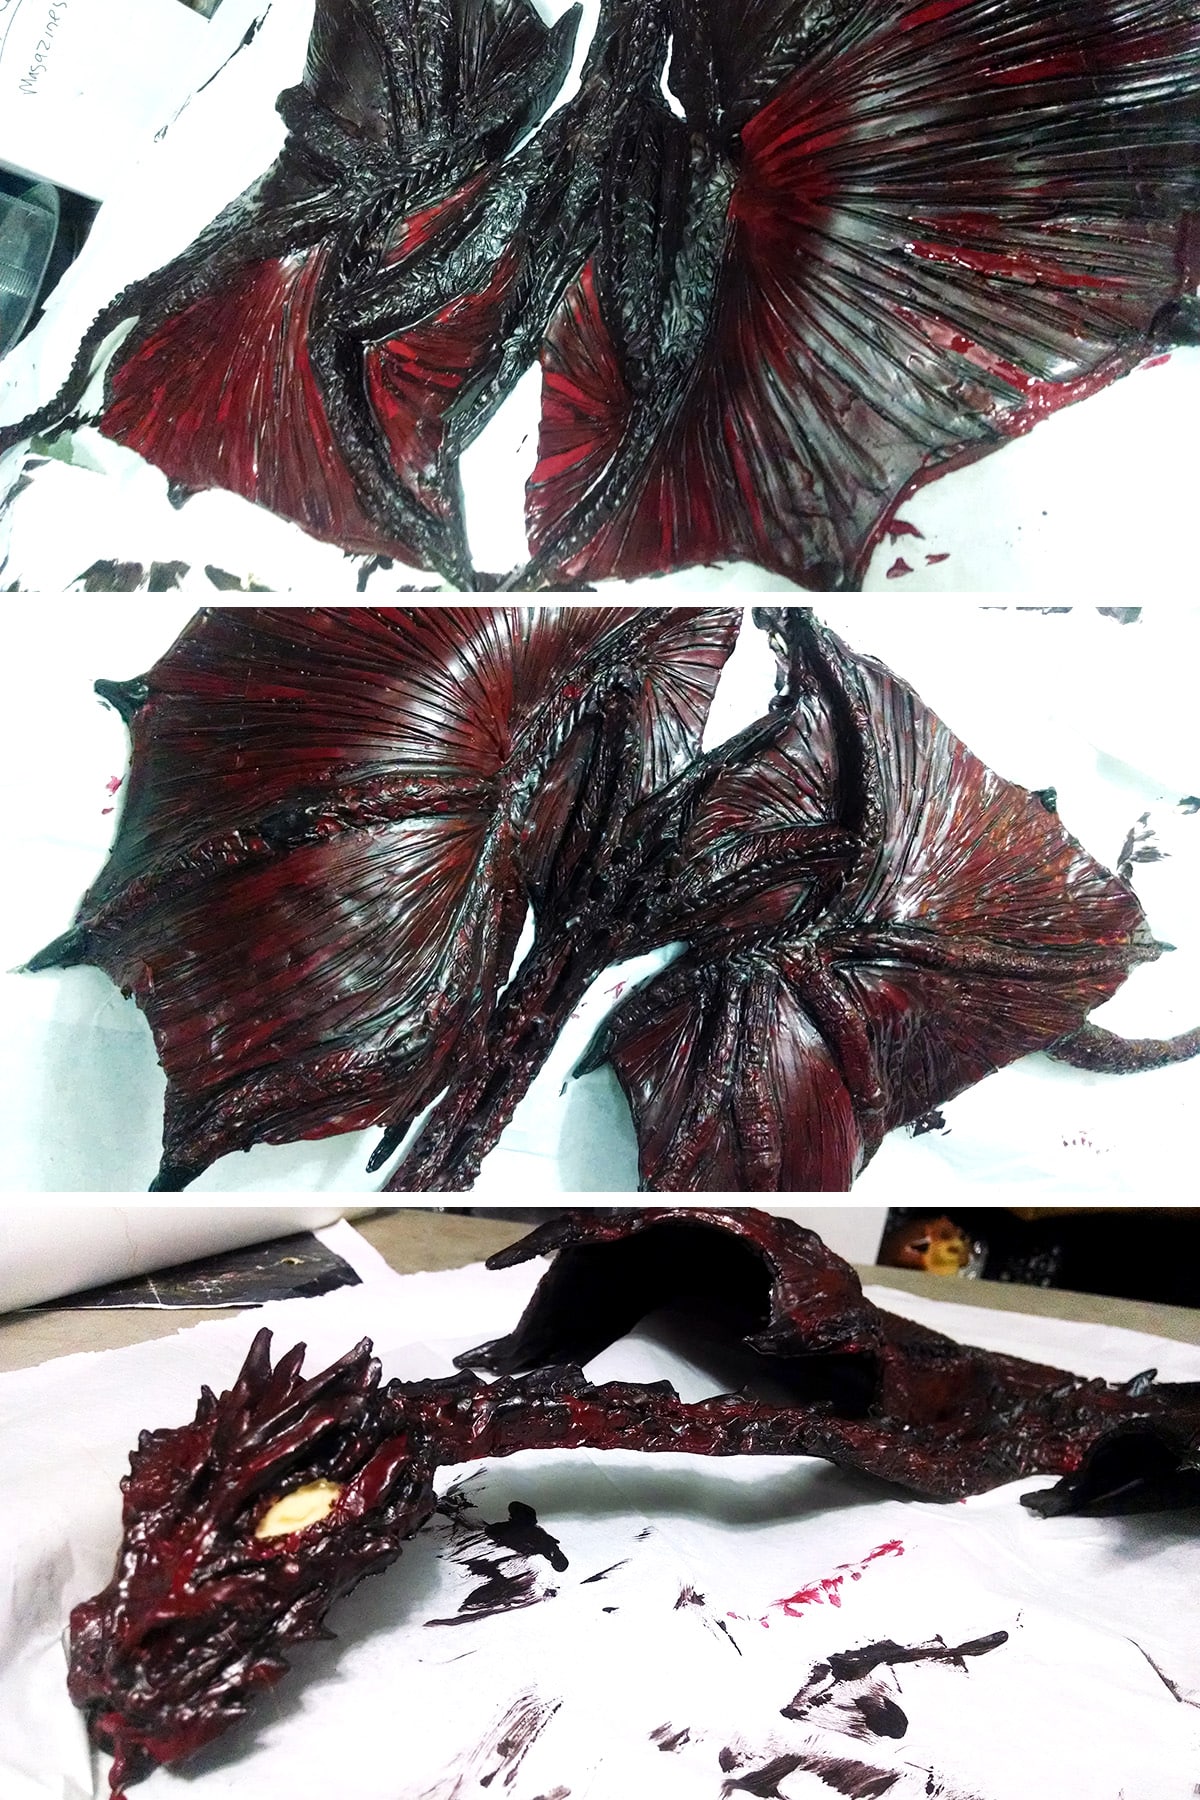 A 3 part compilation image showing different views of the molded latex dragon top, with a dark red paint having been added over most of it.